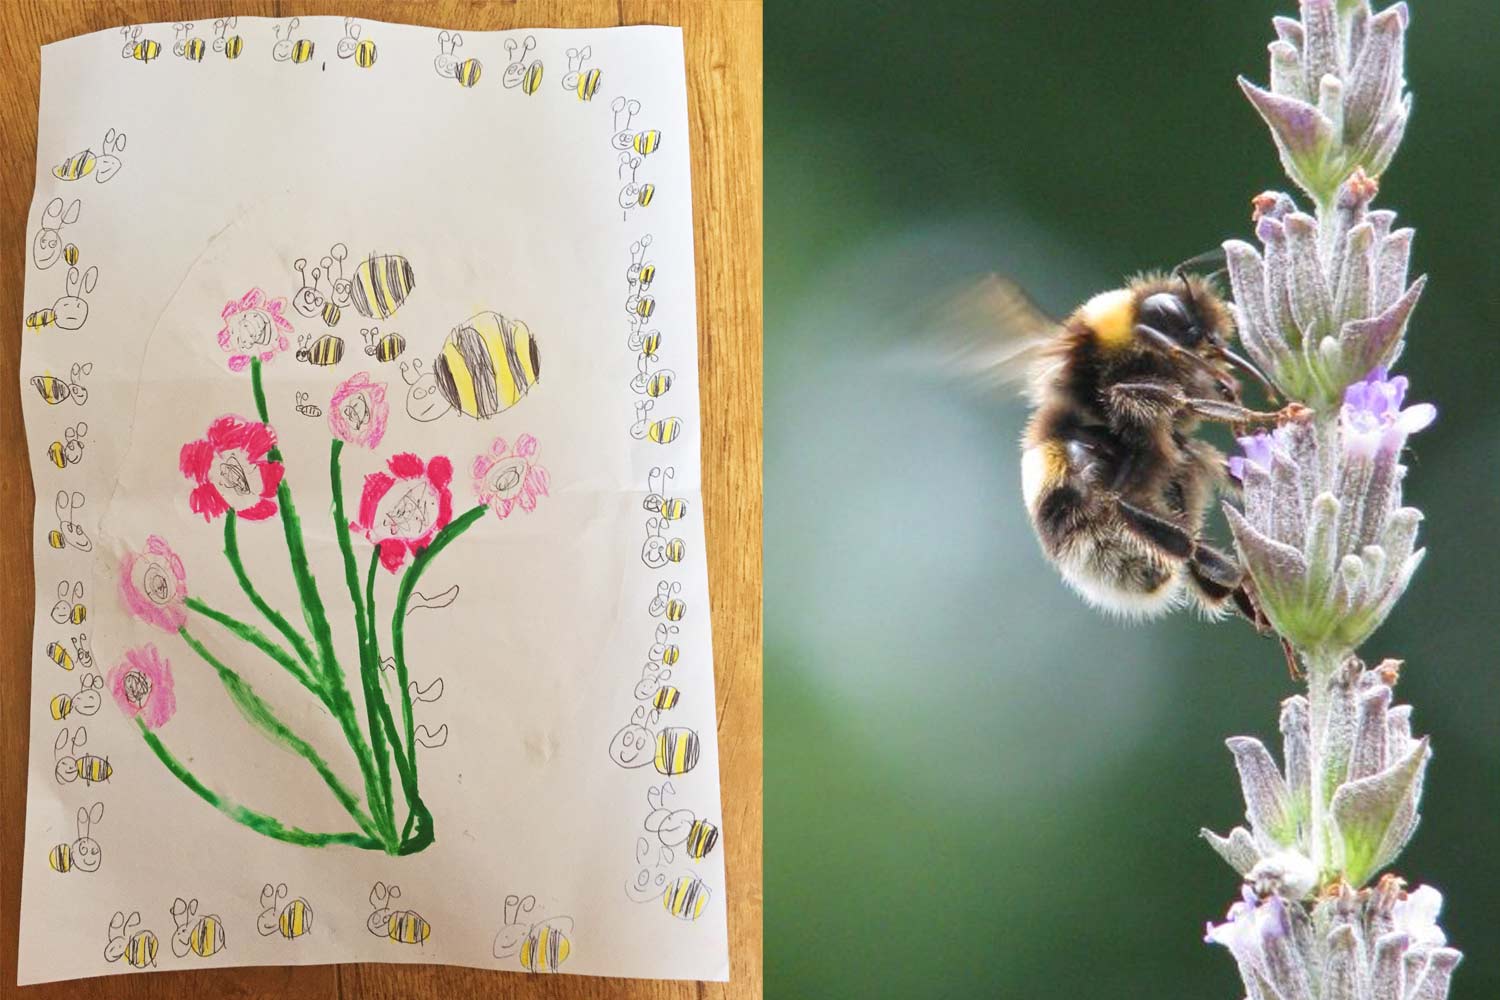 Left: By Mia aged 7. Right: By nature.